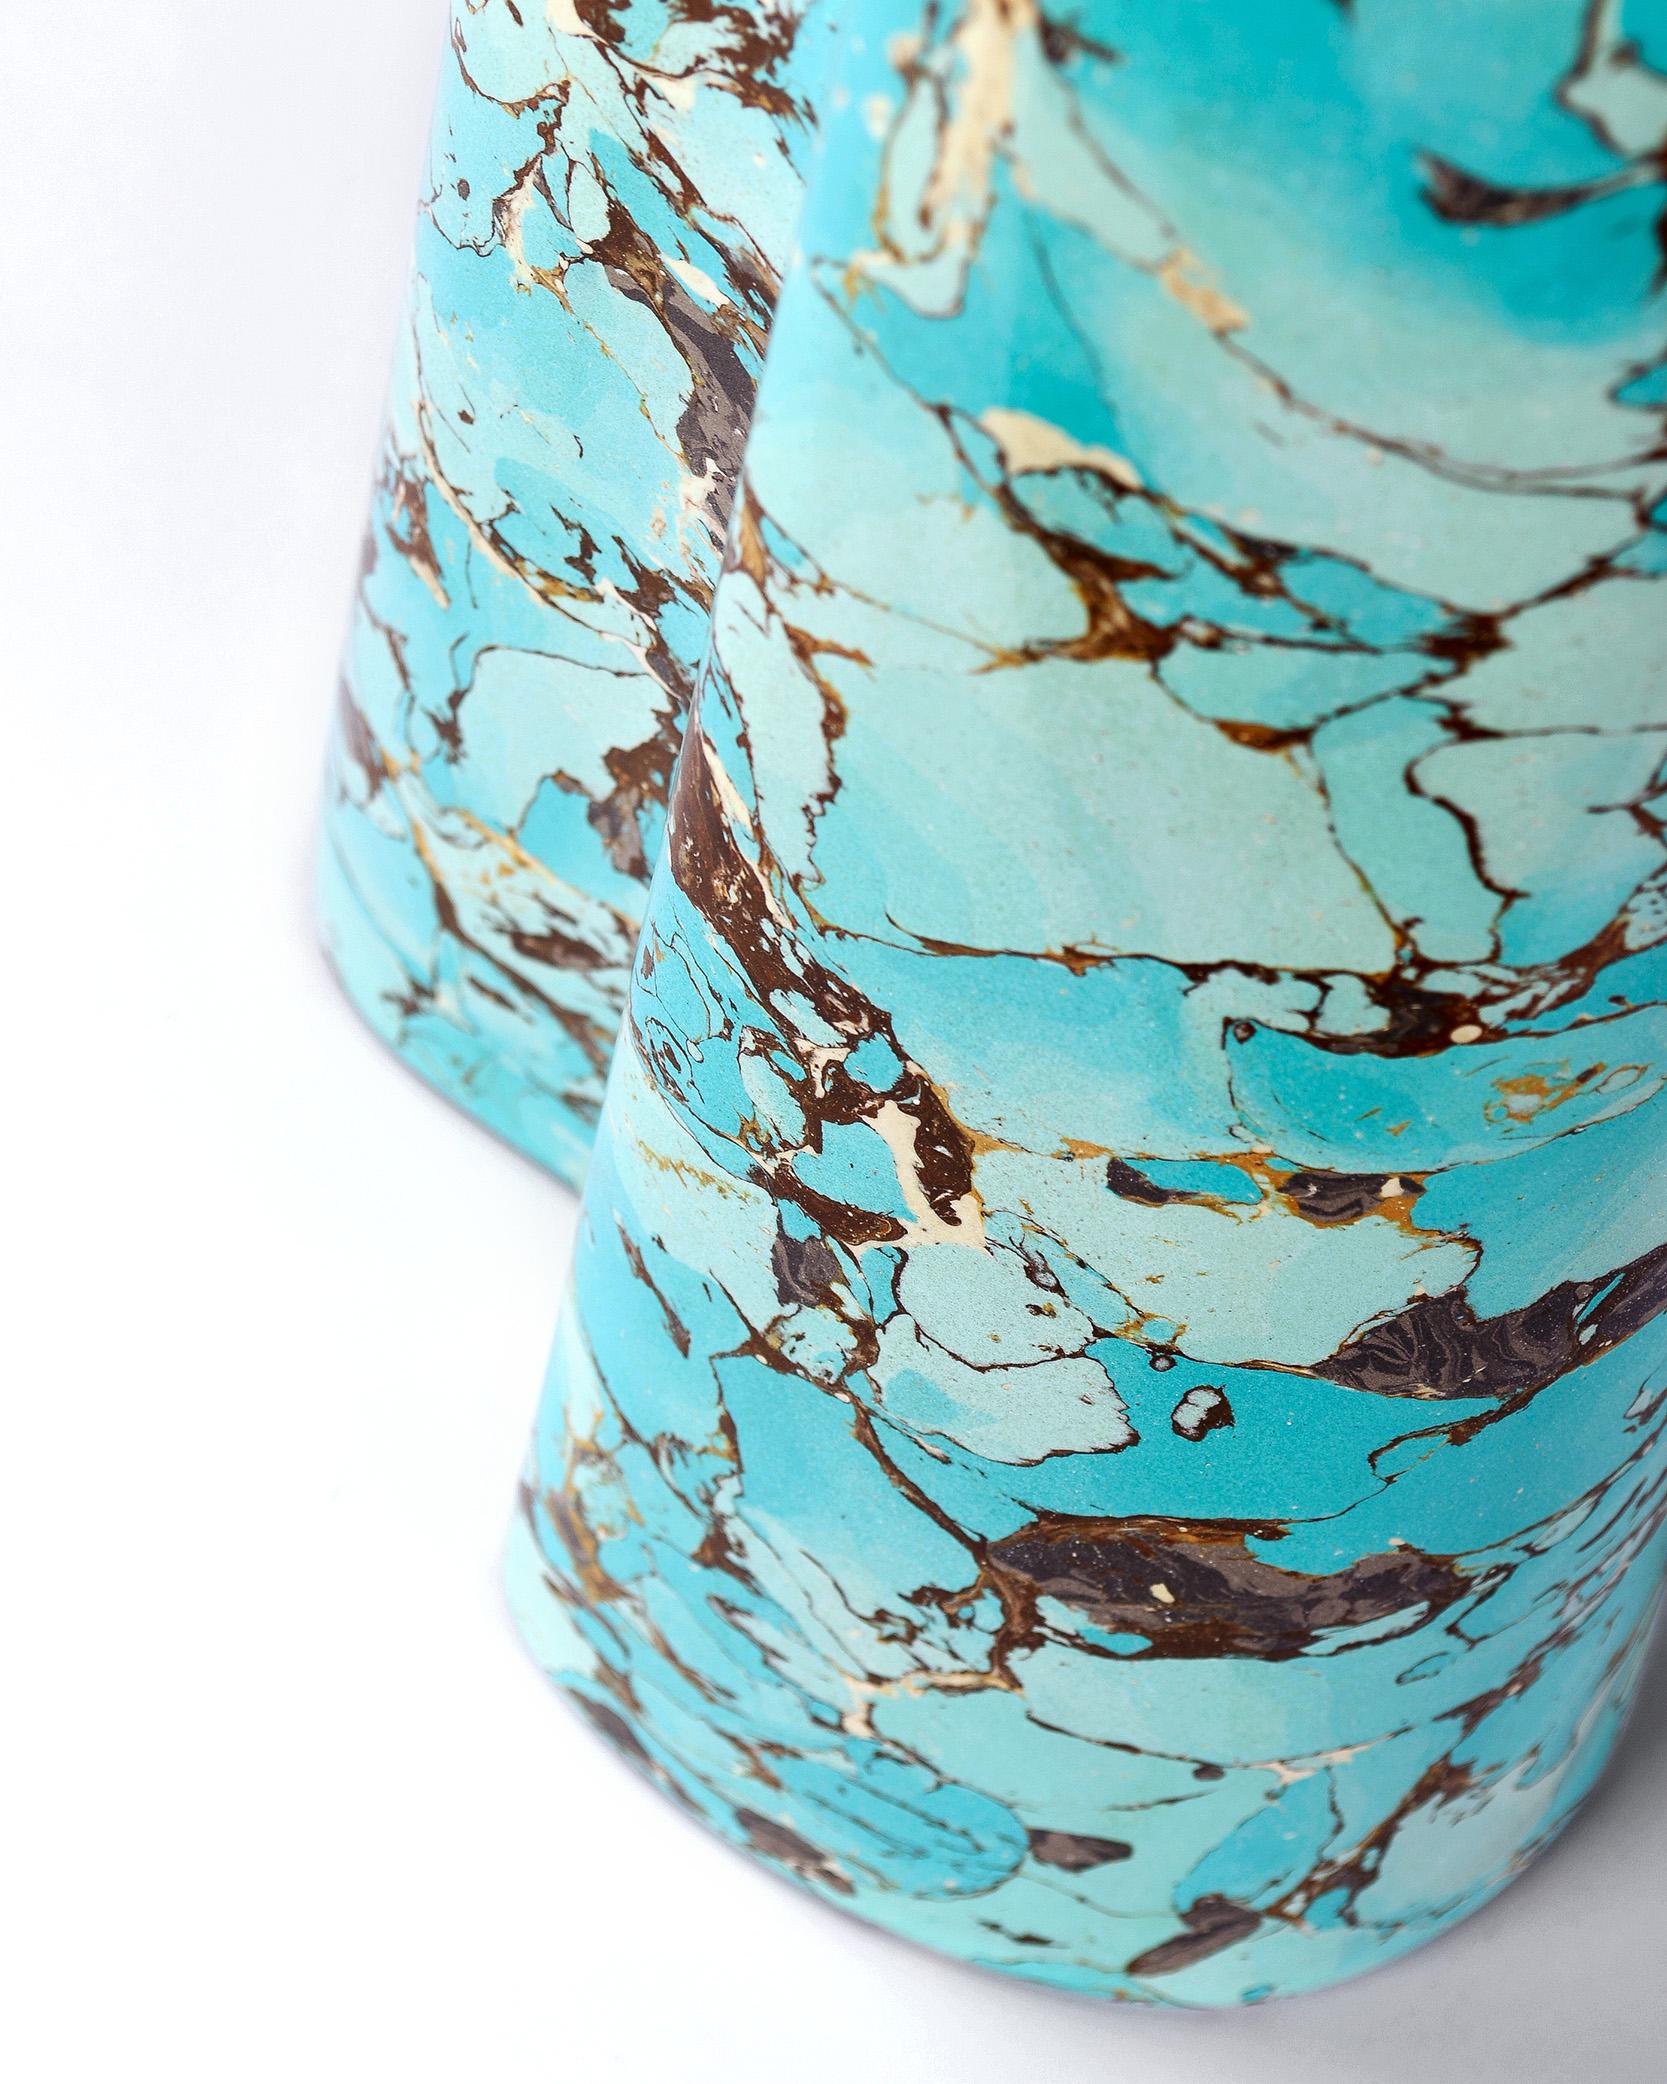 Handcrafter scagliola table lamp made from hues of turquoise blue and autumnal veining.

Crafted using traditional 17th century techniques, each piece is mixed, cast and polished by Christopher in his Worcestershire studio. 

Finished with brass